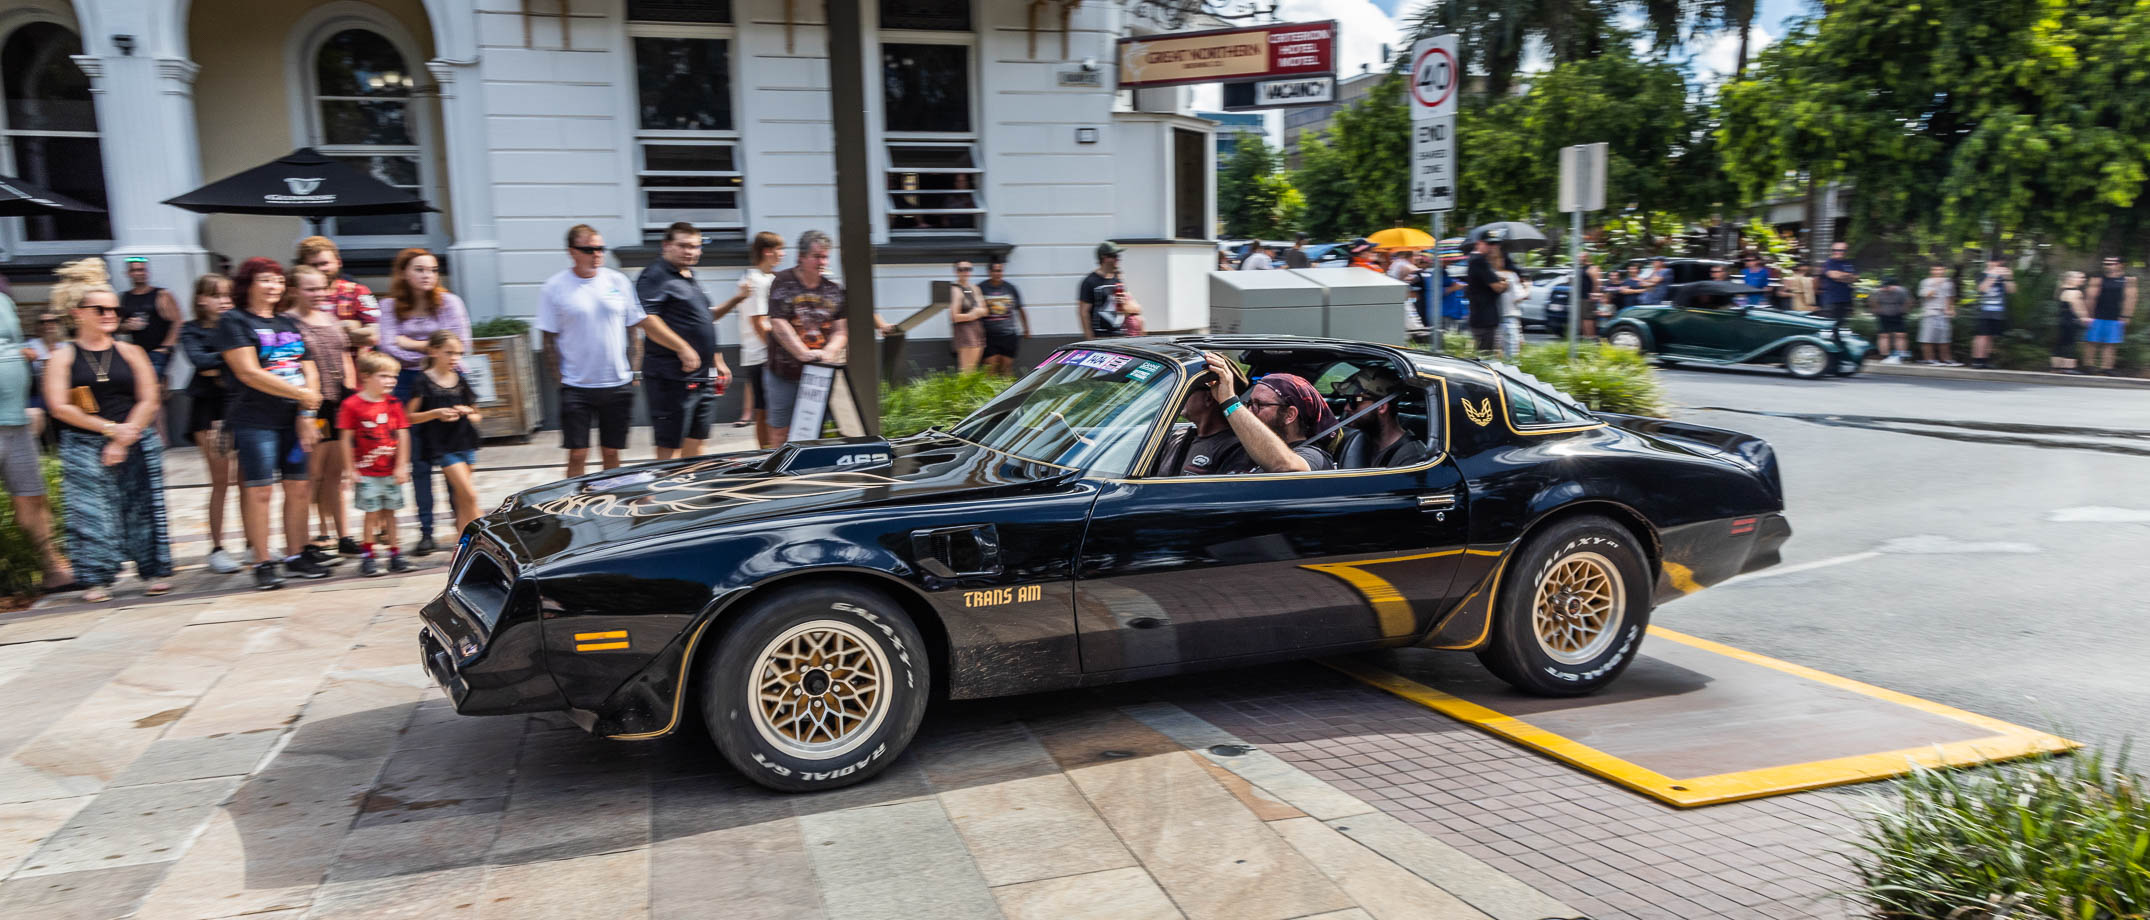 Trans Am driving on Quay Street in Rockynats Street Parade with crowd in background